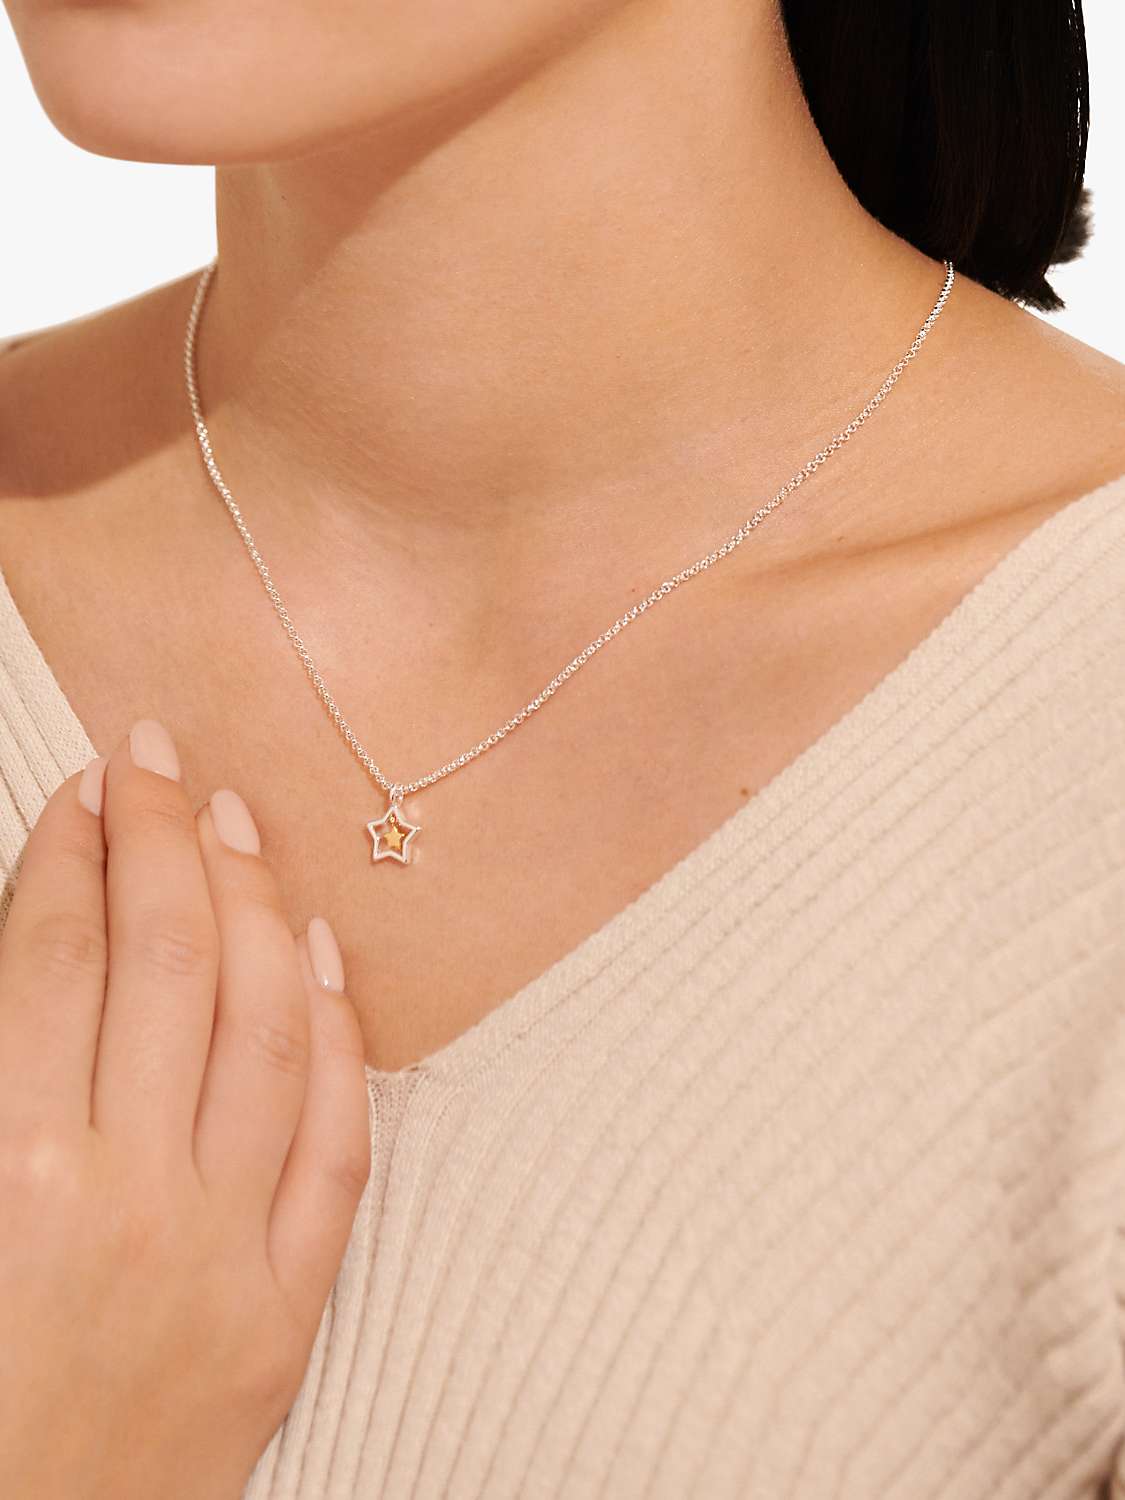 Buy Joma Jewellery 'Someone Special' Star Necklace, Silver/Gold Online at johnlewis.com